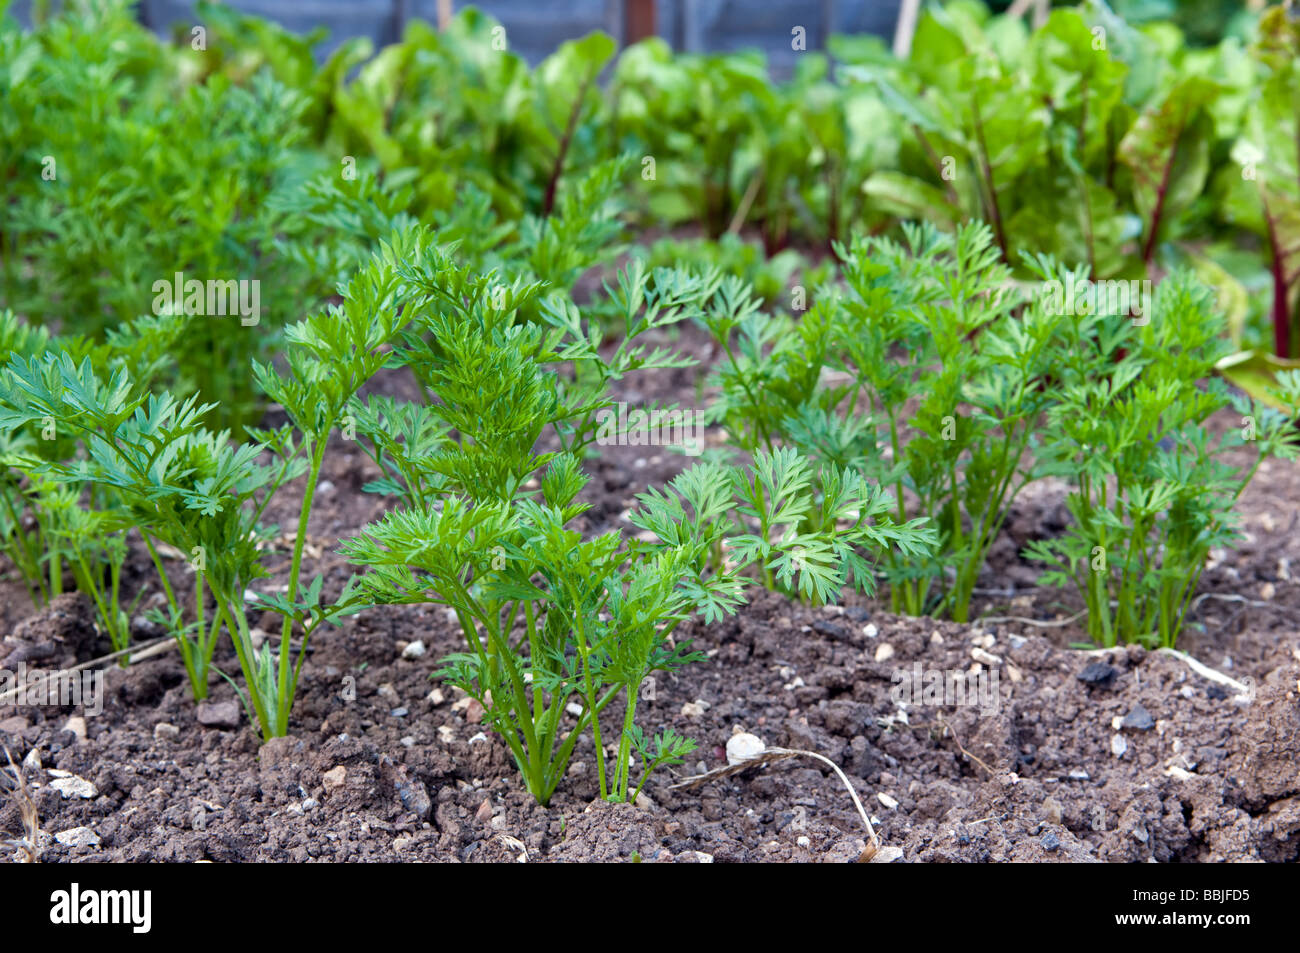 Organic carrot plants Early Nantes variety with Beetroot plants in background growing in garden Stock Photo